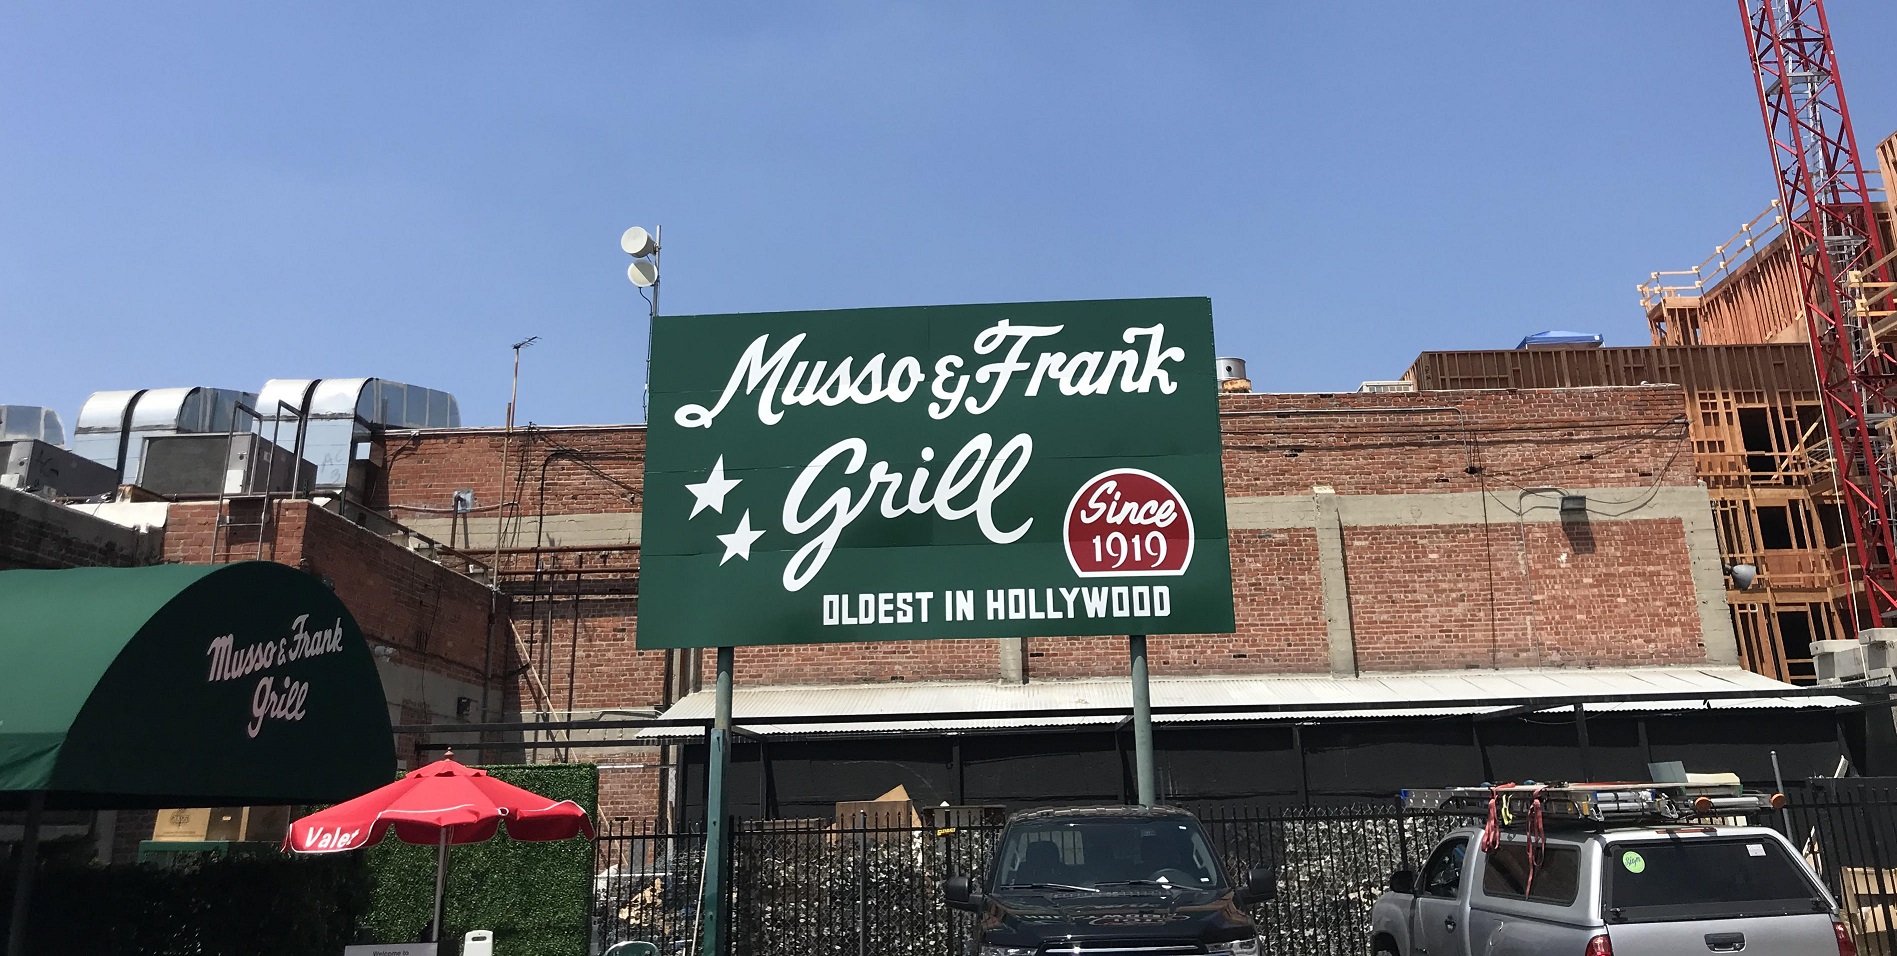 Hollywood, Musso & Frank Grill, restaurant sign, custom sign, hand-painted metal sign, metal sign, outdoor sign, storefront sign, sign company, sign and banner company near me, tarzana, business signs, , sign companies, sign company near me, sign making, sign resource and like companies, signs for sale for business, business signage, sign logo, sign logo stand, where to make my logo sign